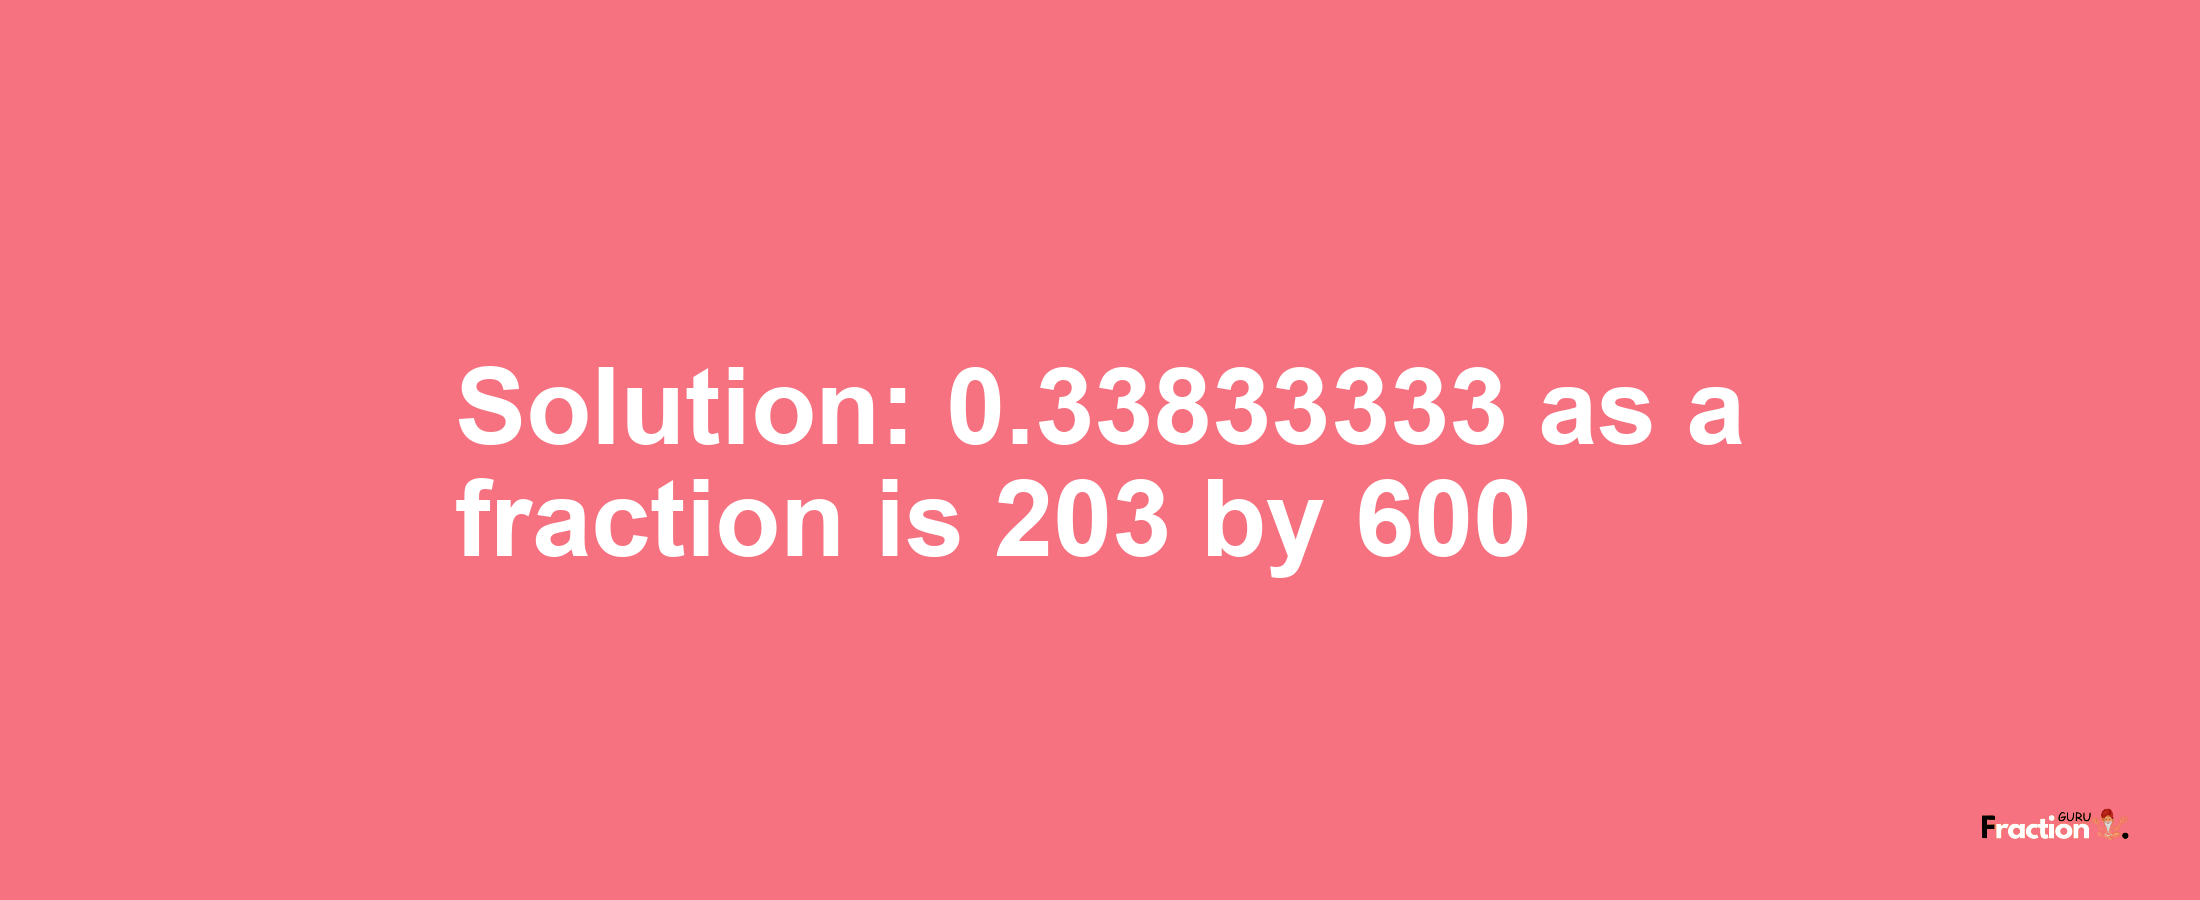 Solution:0.33833333 as a fraction is 203/600